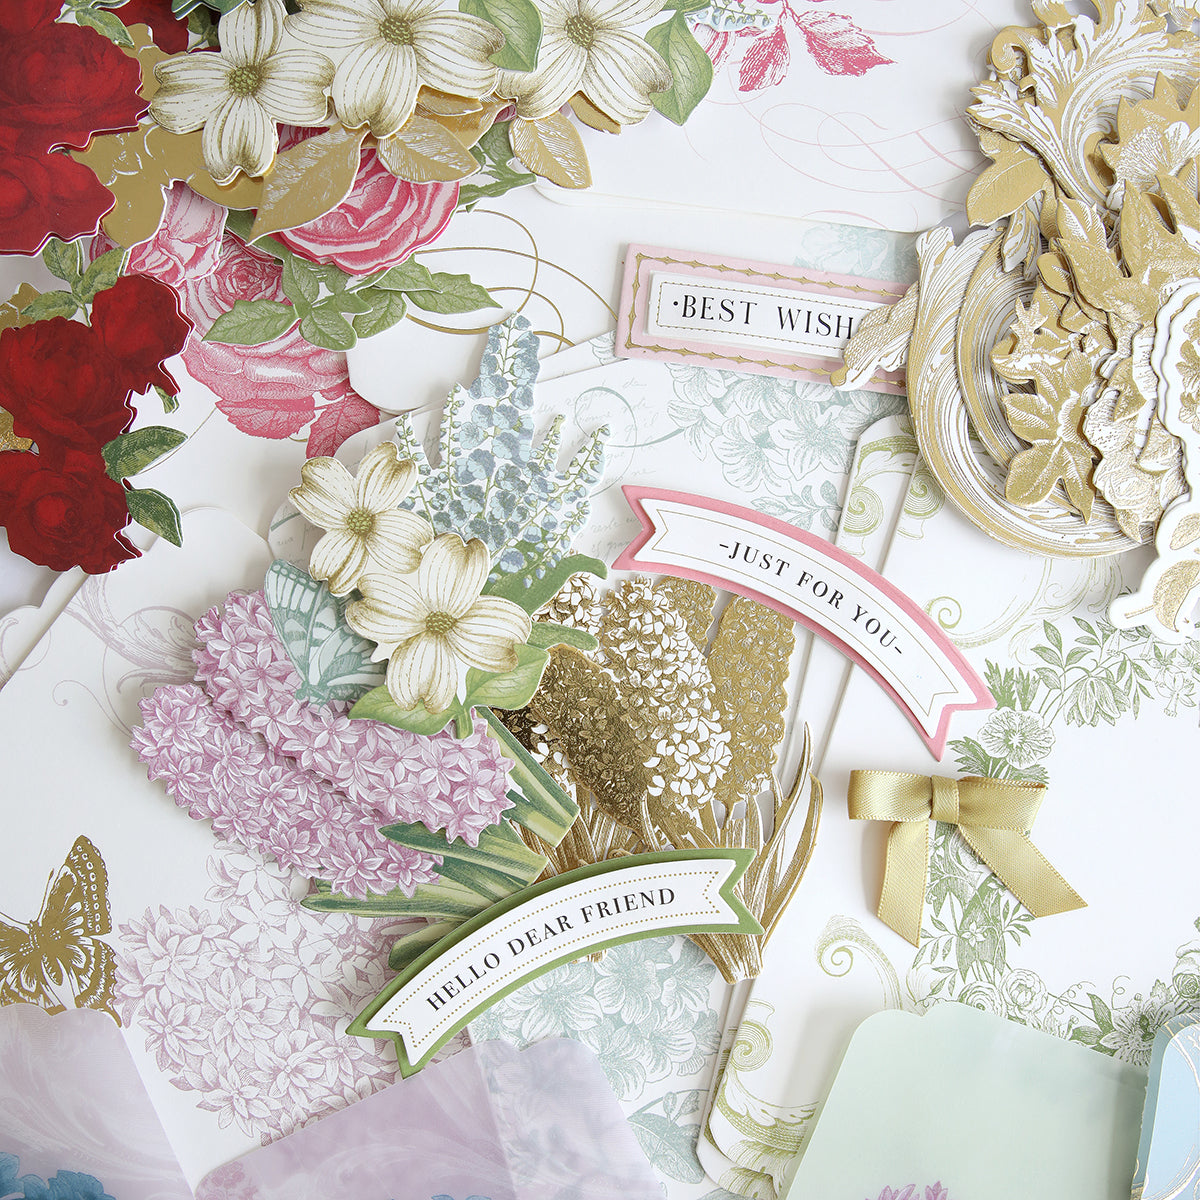 A collection of various floral and butterfly-themed paper crafts, including handmade cards with phrases like "best wishes" and "just for you," from the Simply Perfect Patterns Card Making Kit.